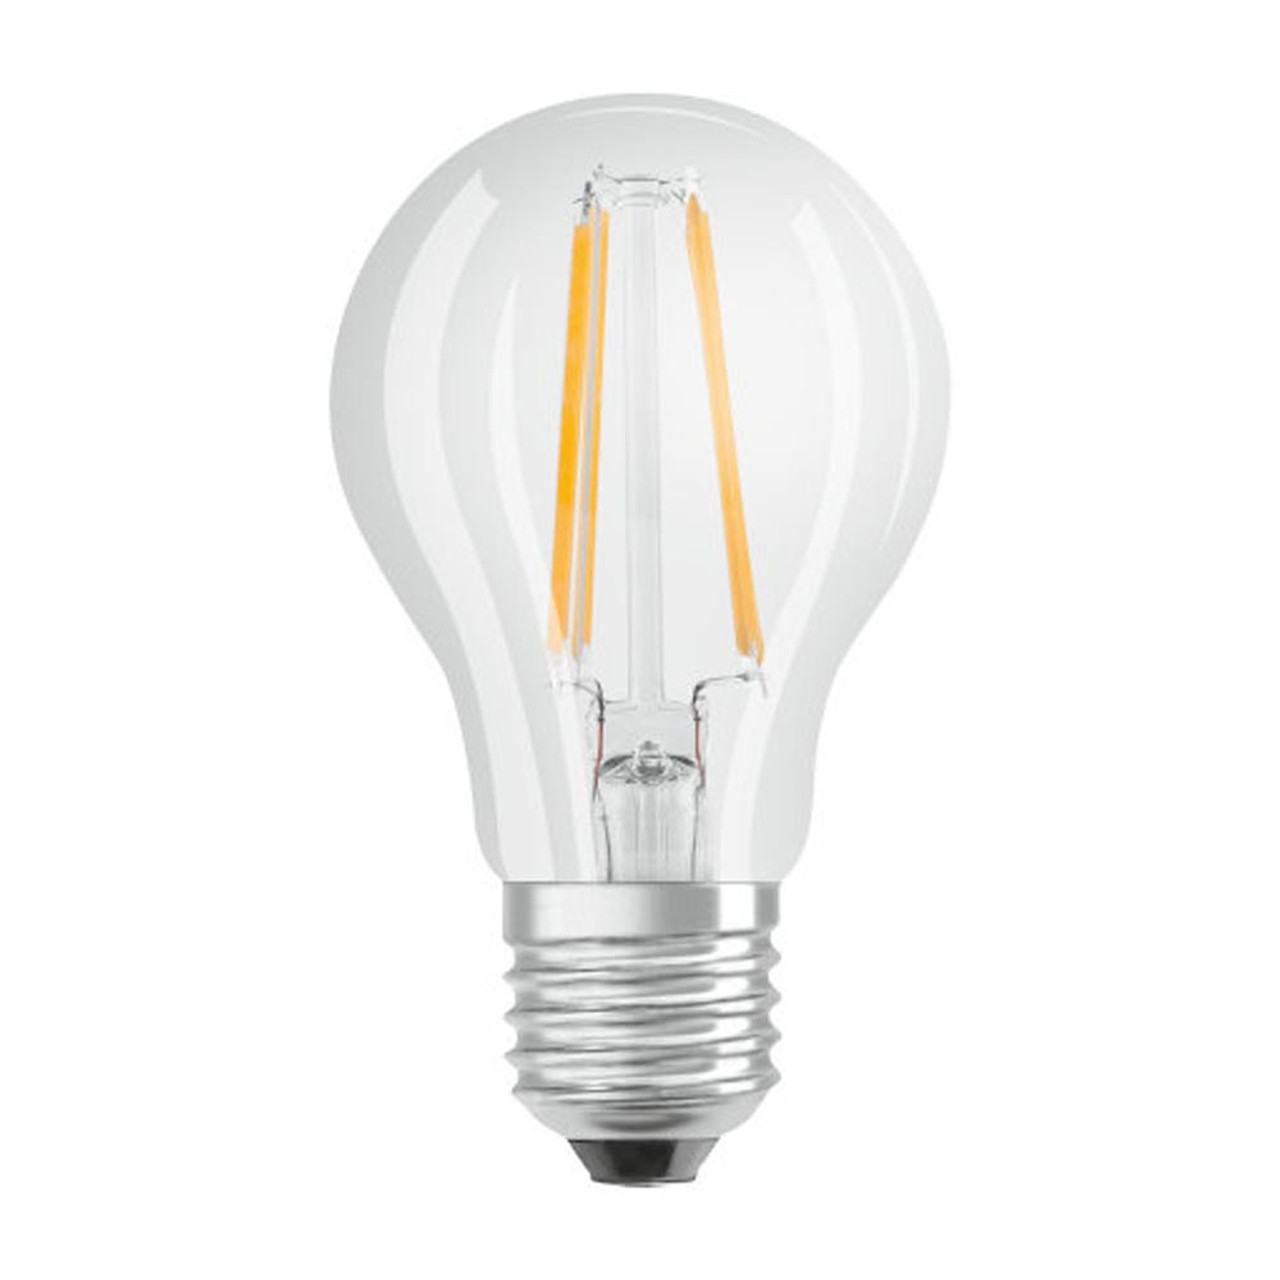 LED GLS 4.8W (40W) E27 2700K Clear Dimmable